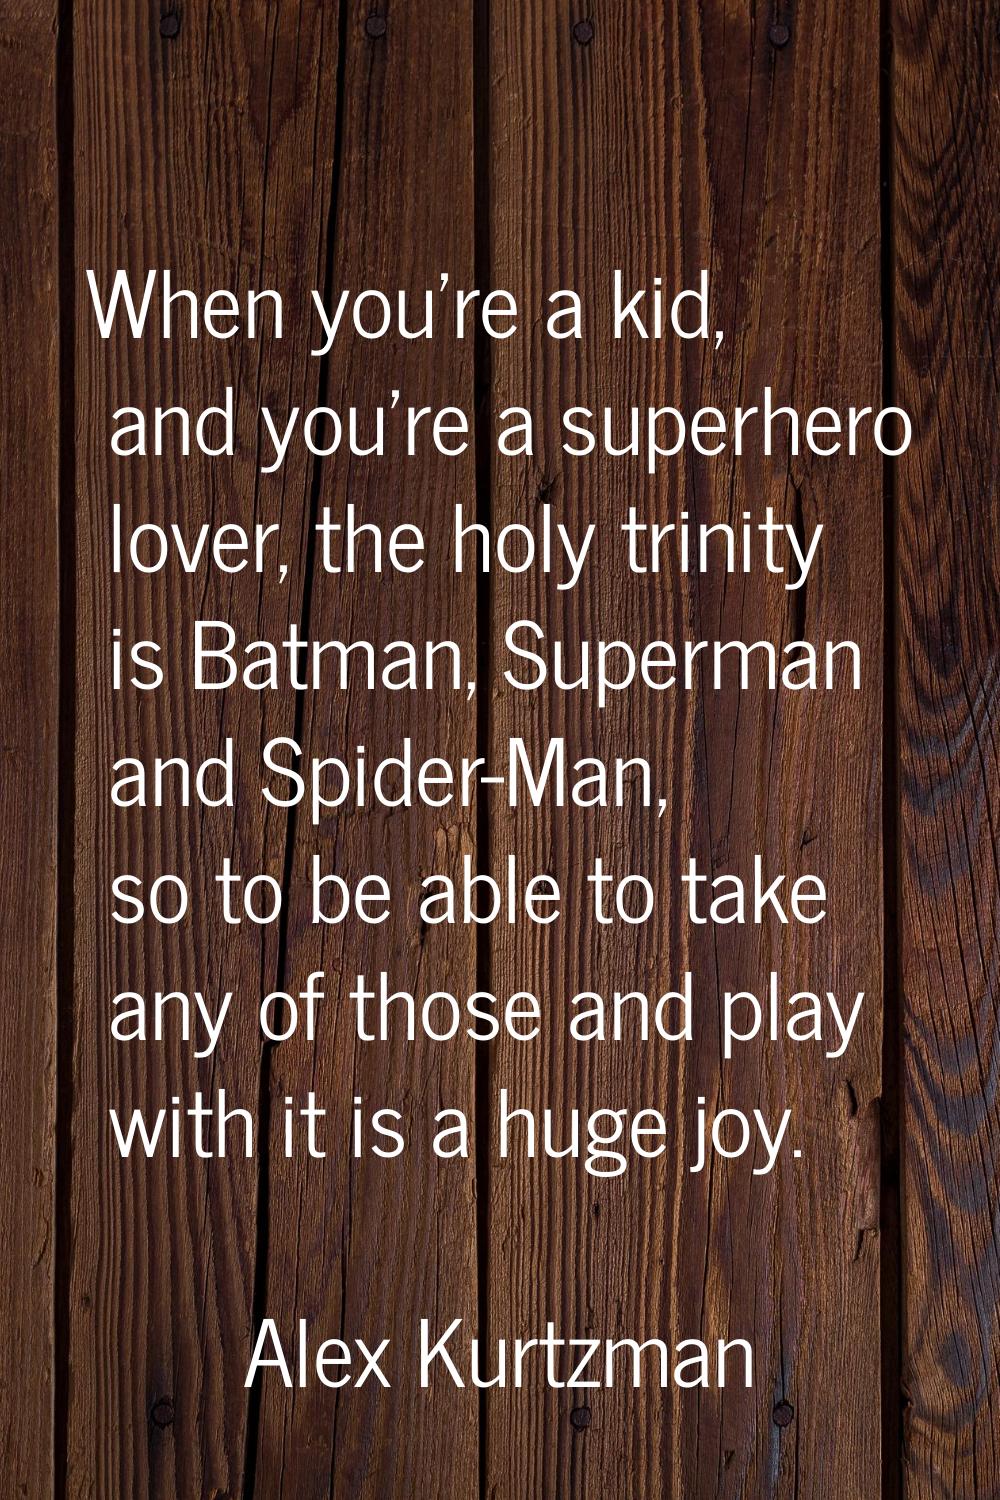 When you're a kid, and you're a superhero lover, the holy trinity is Batman, Superman and Spider-Ma